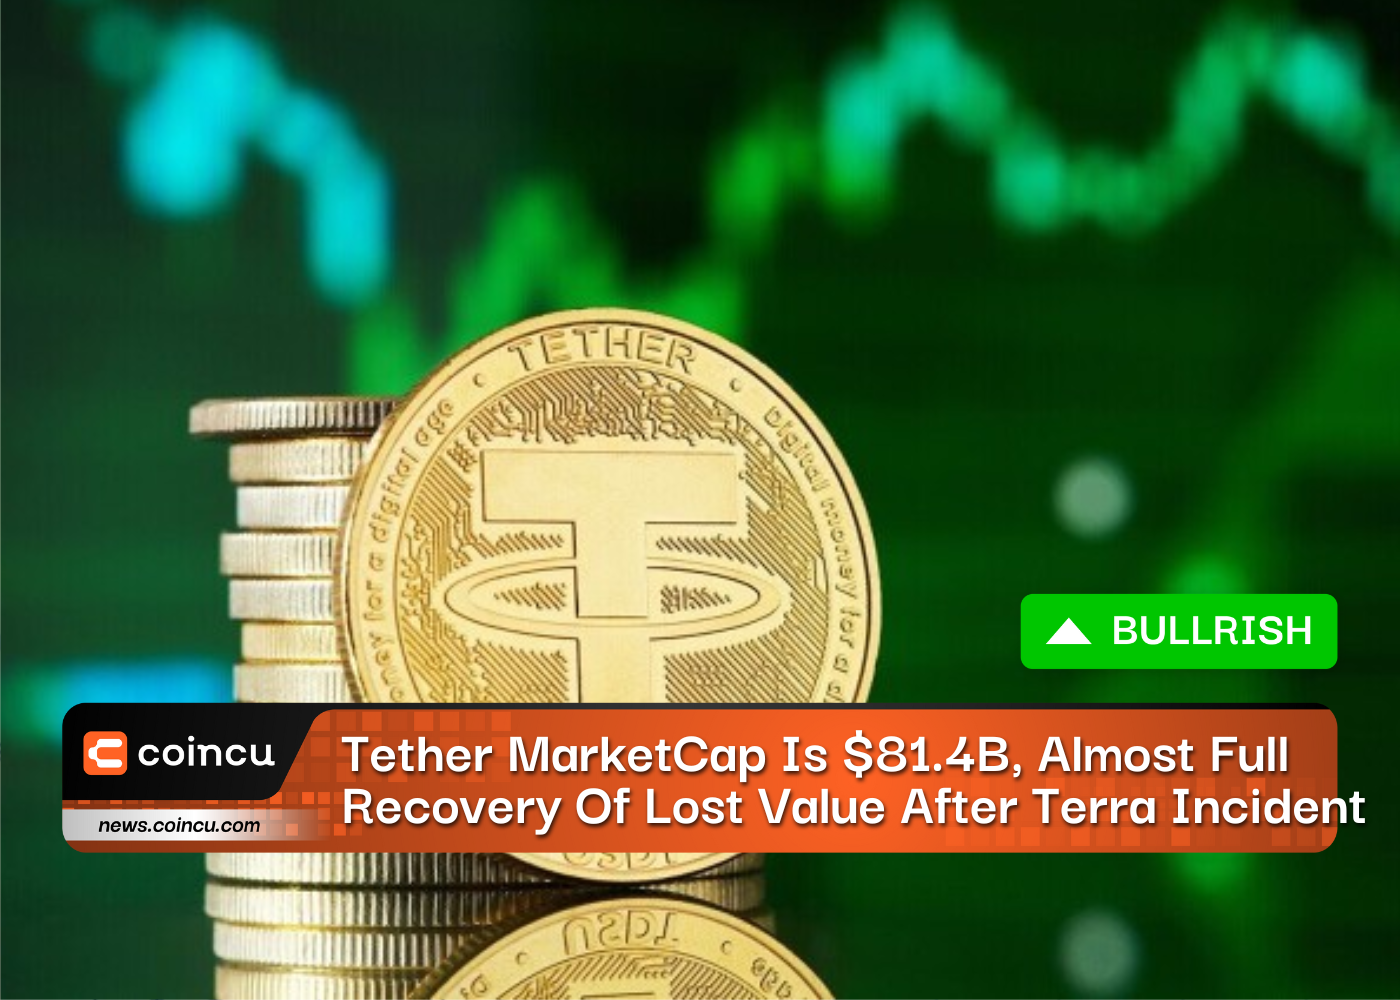 Tether MarketCap Is $81.4B, Almost Full Recovery Of Lost Value After Terra Incident